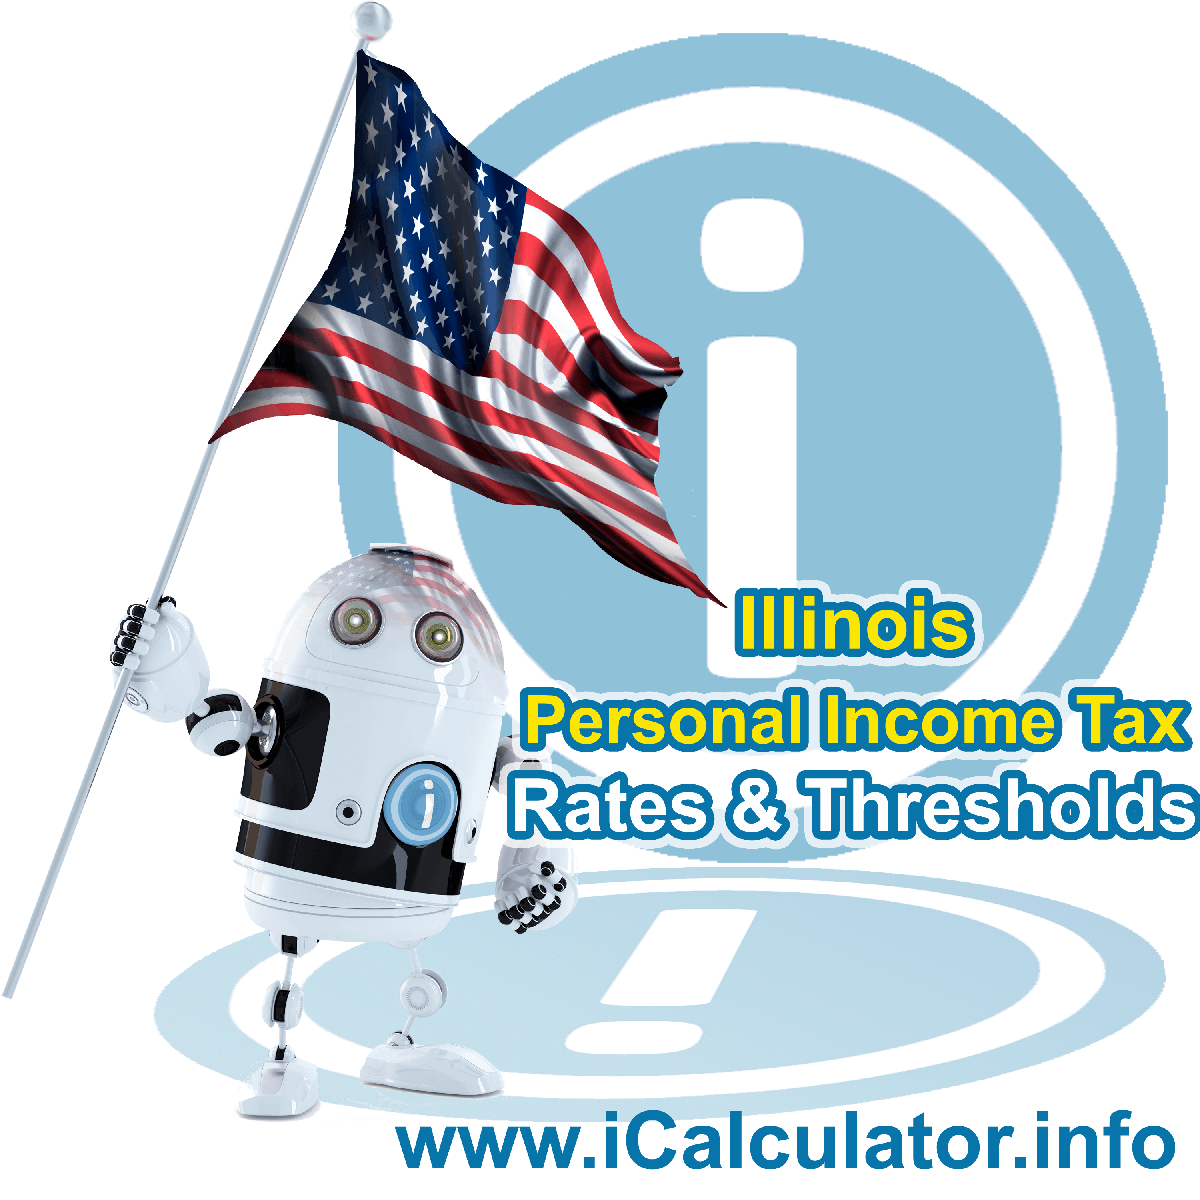 Illinois State Tax Tables 2020. This image displays details of the Illinois State Tax Tables for the 2020 tax return year which is provided in support of the 2020 US Tax Calculator